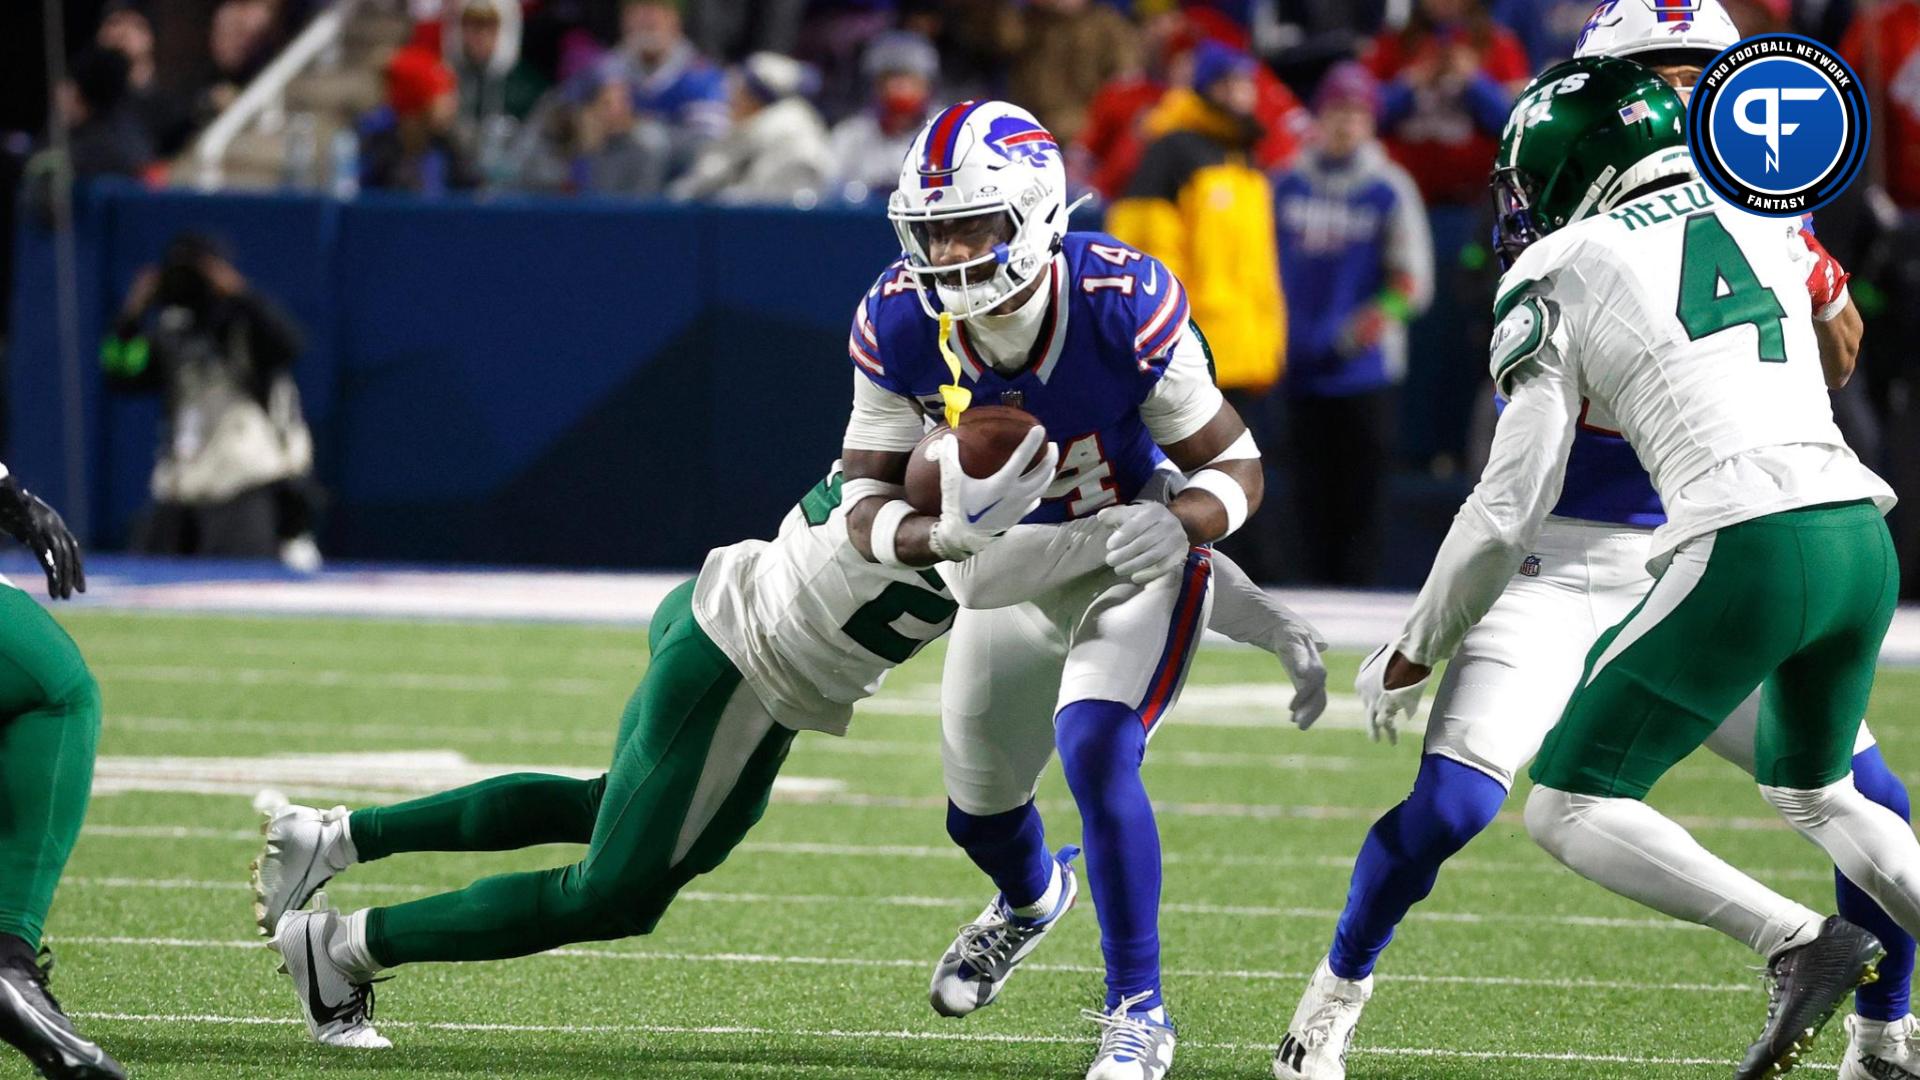 Buffalo Bills wide receiver Stefon Diggs (14) is tackled after a catch against the Jets.